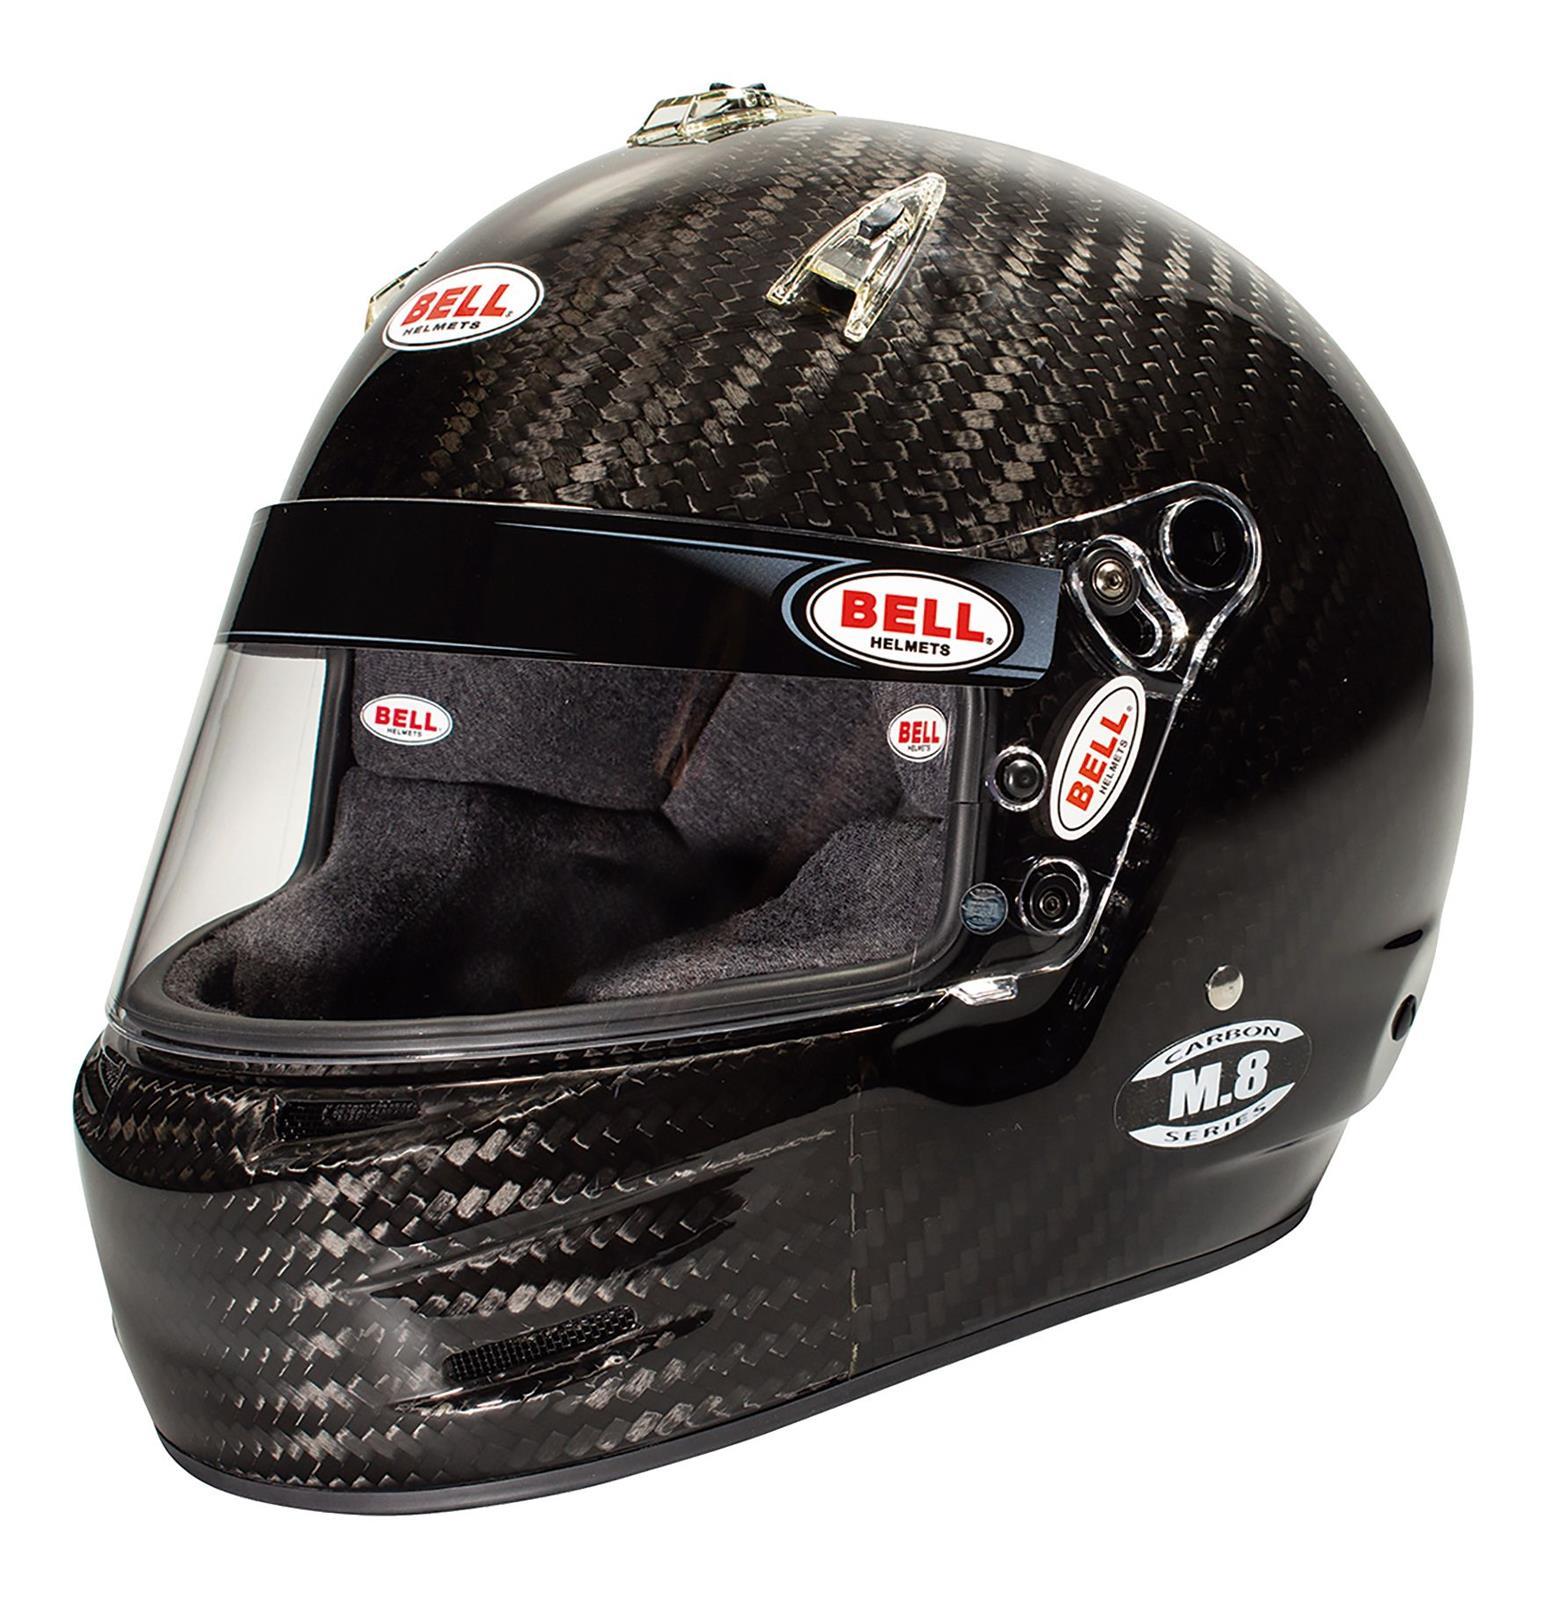 Bell Helmets 1208A02 Helmet, M8, Snell SA2020, FIA Approved, Head and Neck Support Ready, Carbon Fiber, Size 7-1/8, Each